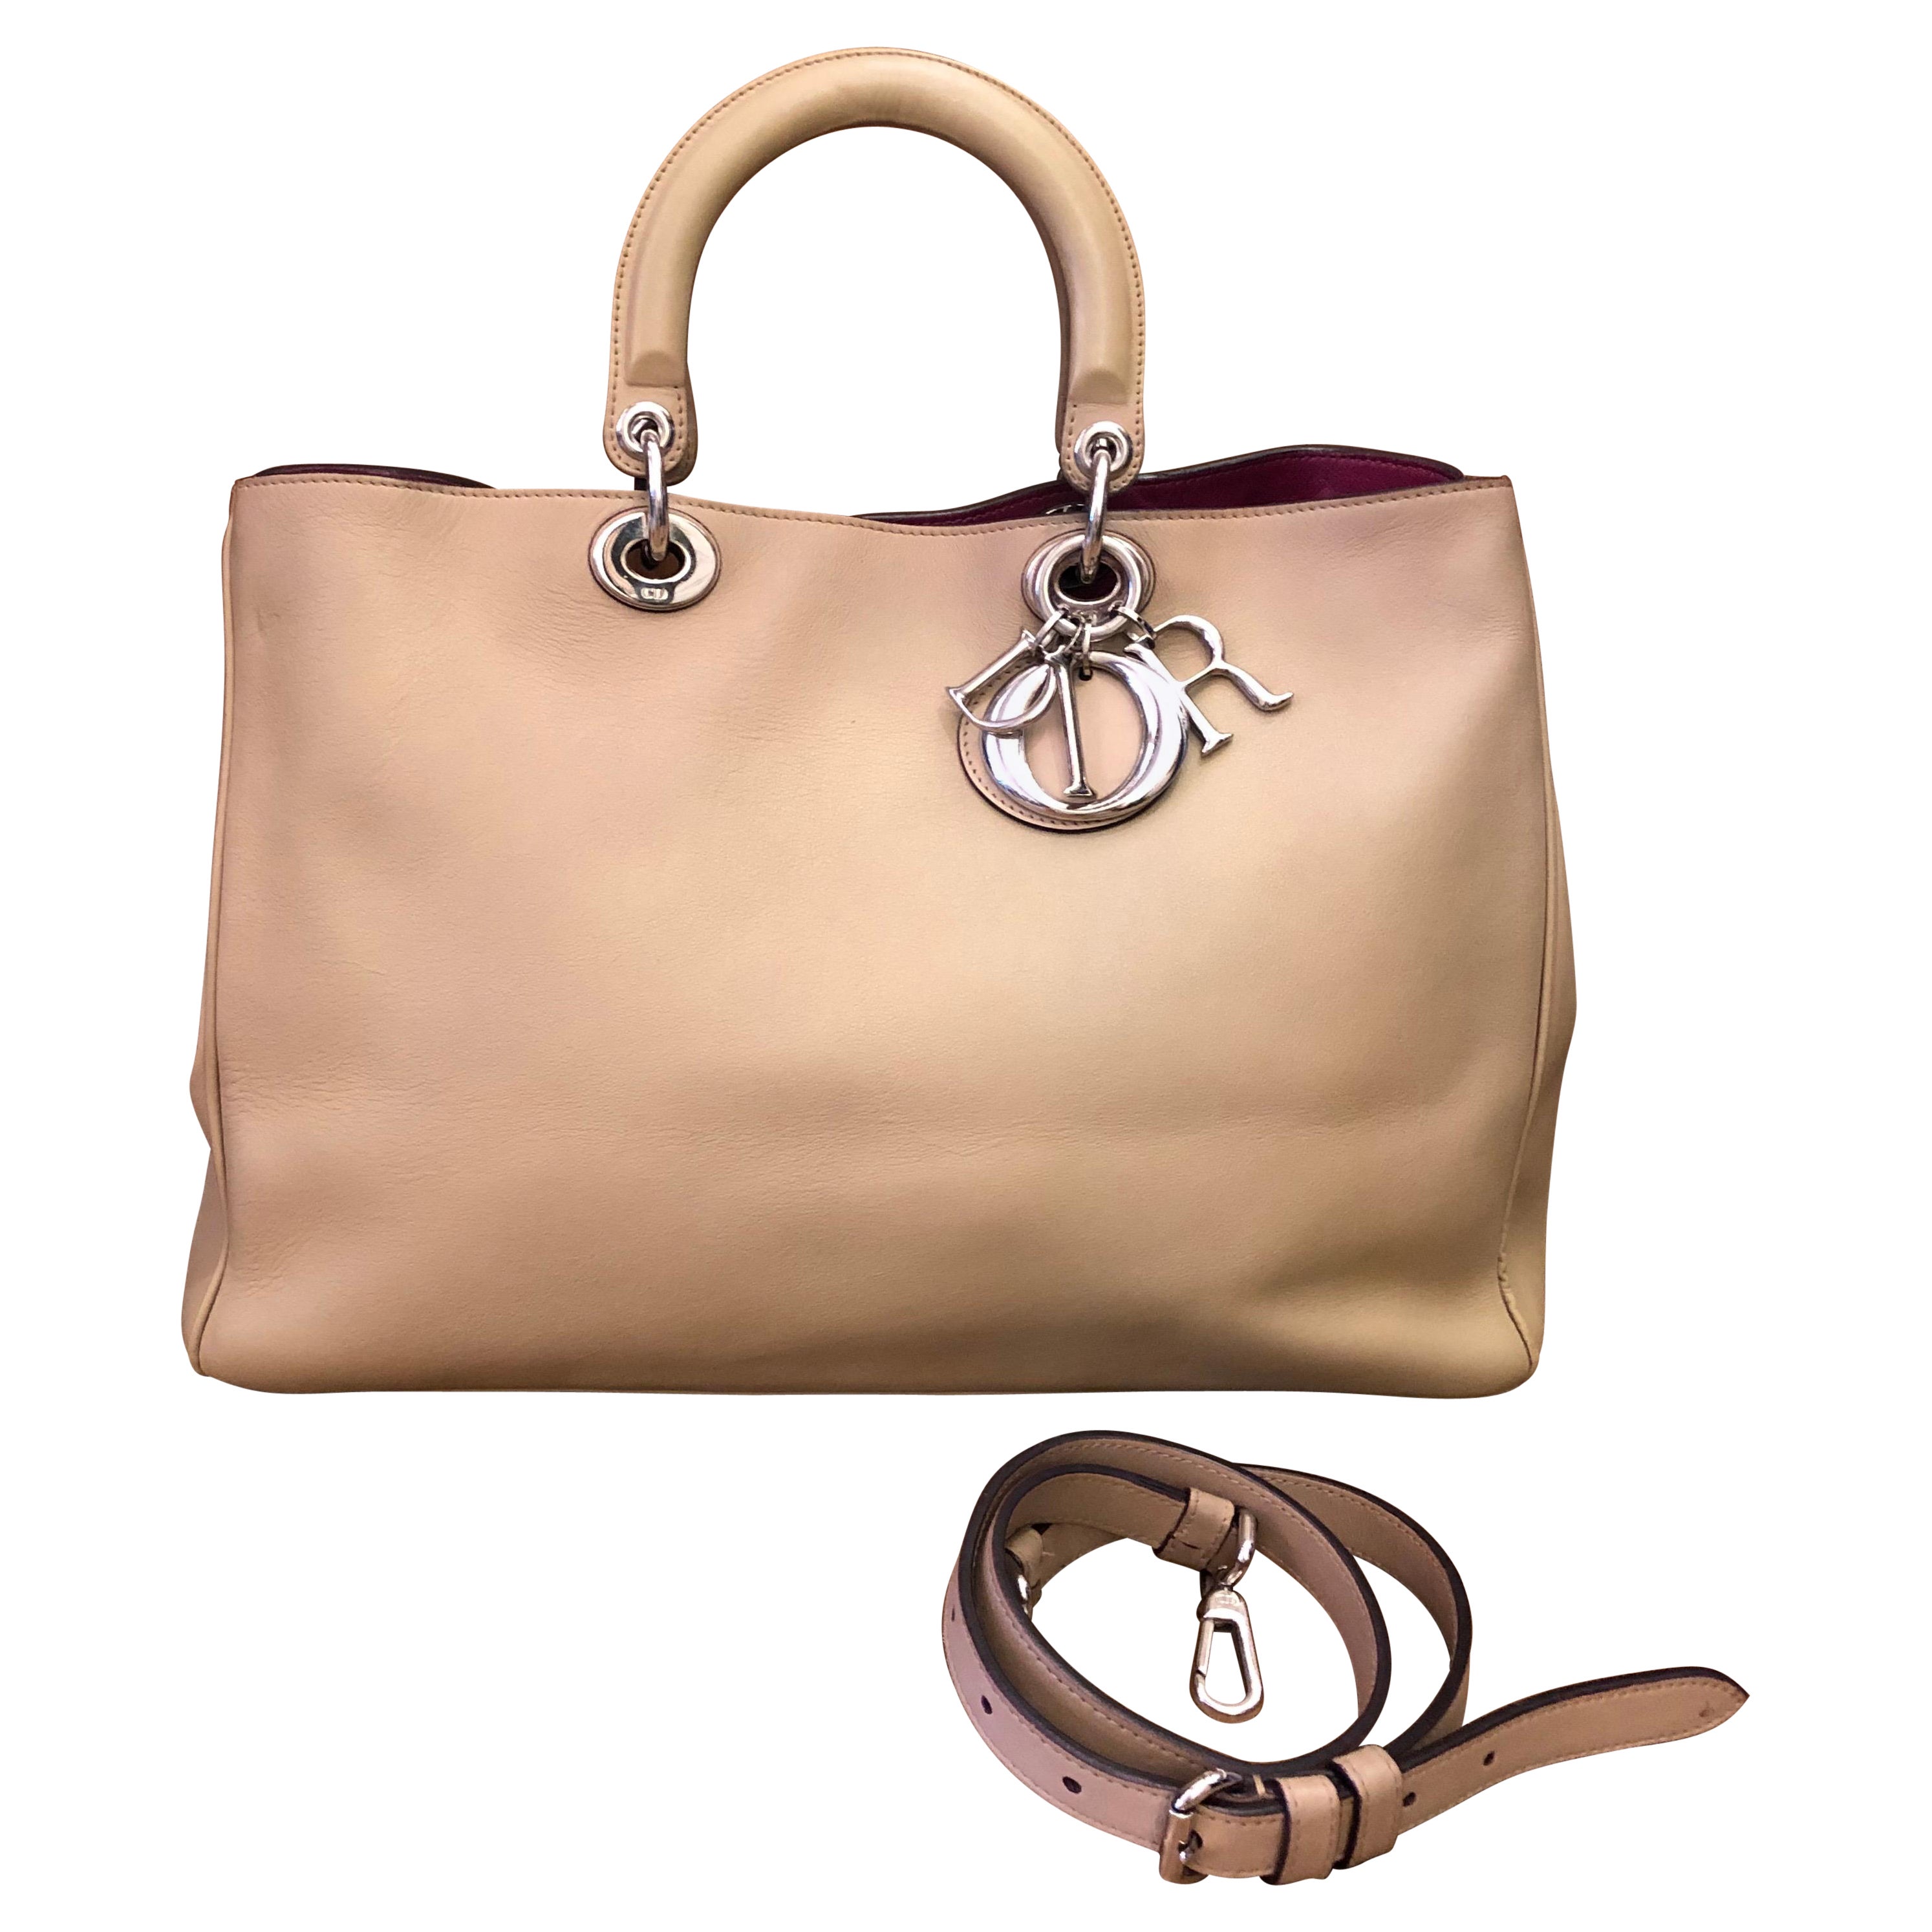 2010s CHRISTIAN DIOR Beige Leather Tote Bag